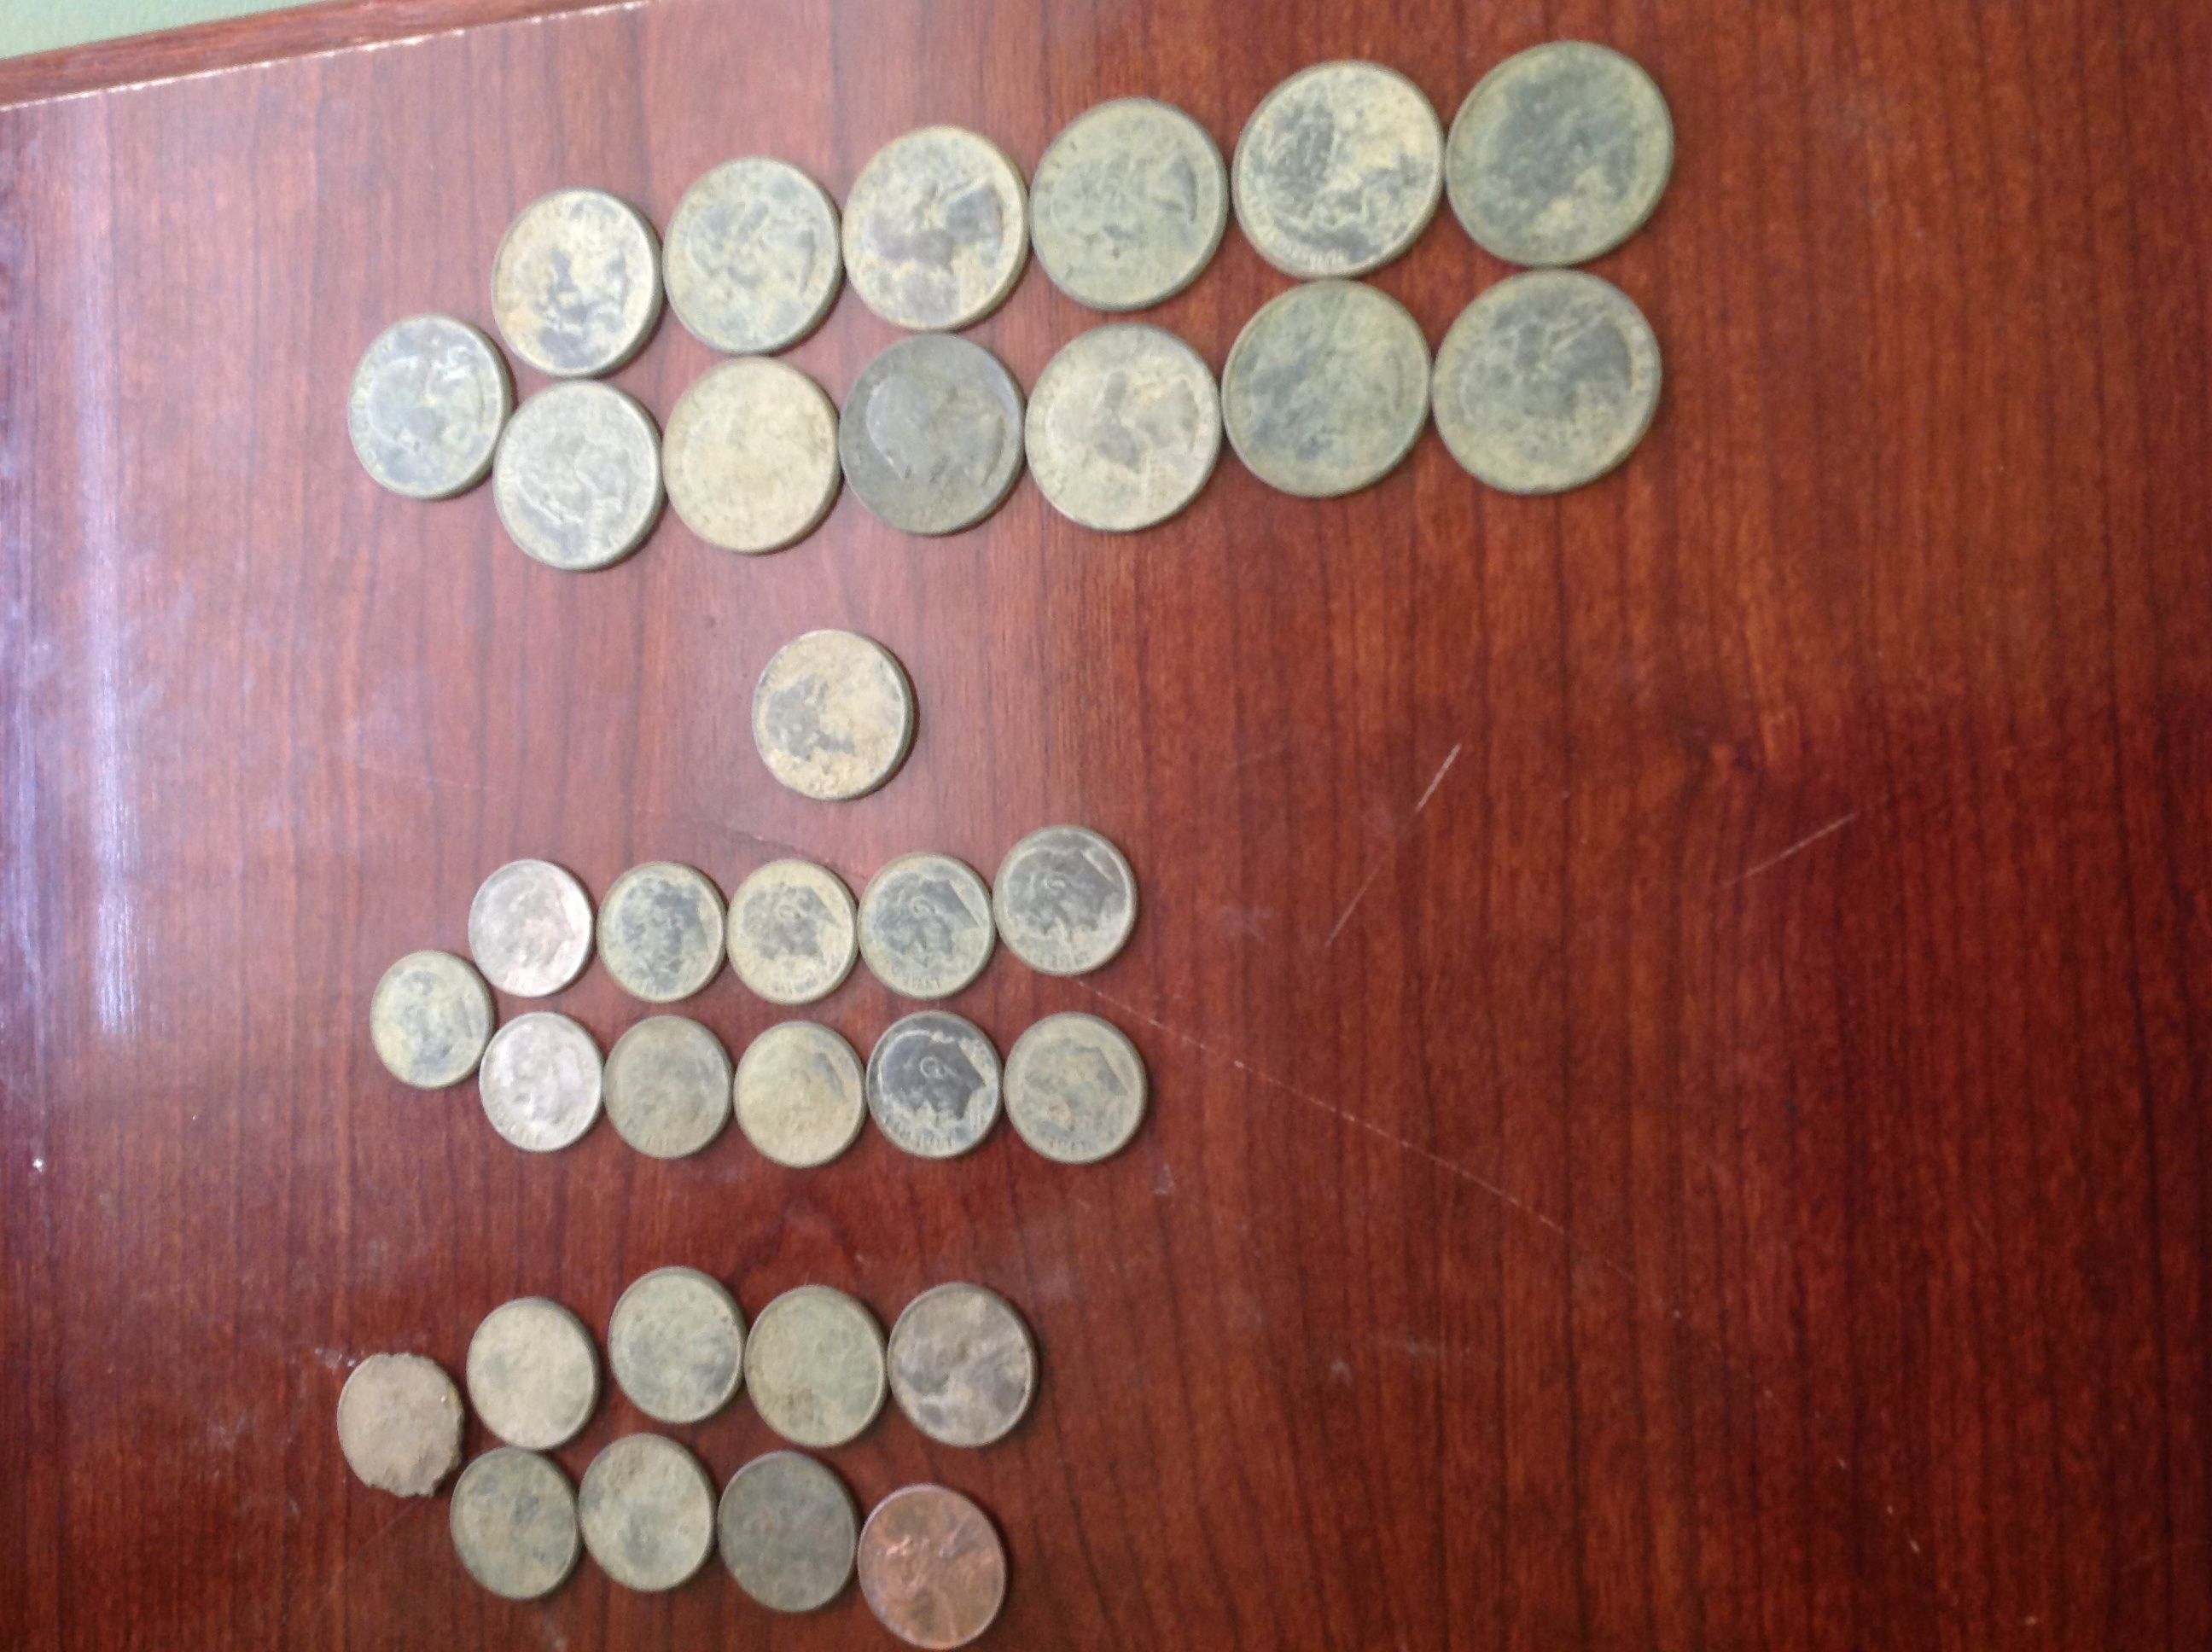 My second day with the Garrett Ace 350 13 quarters, 11 dimes, 1 nickel, 9 pennies no silver but I did get a wheat cent